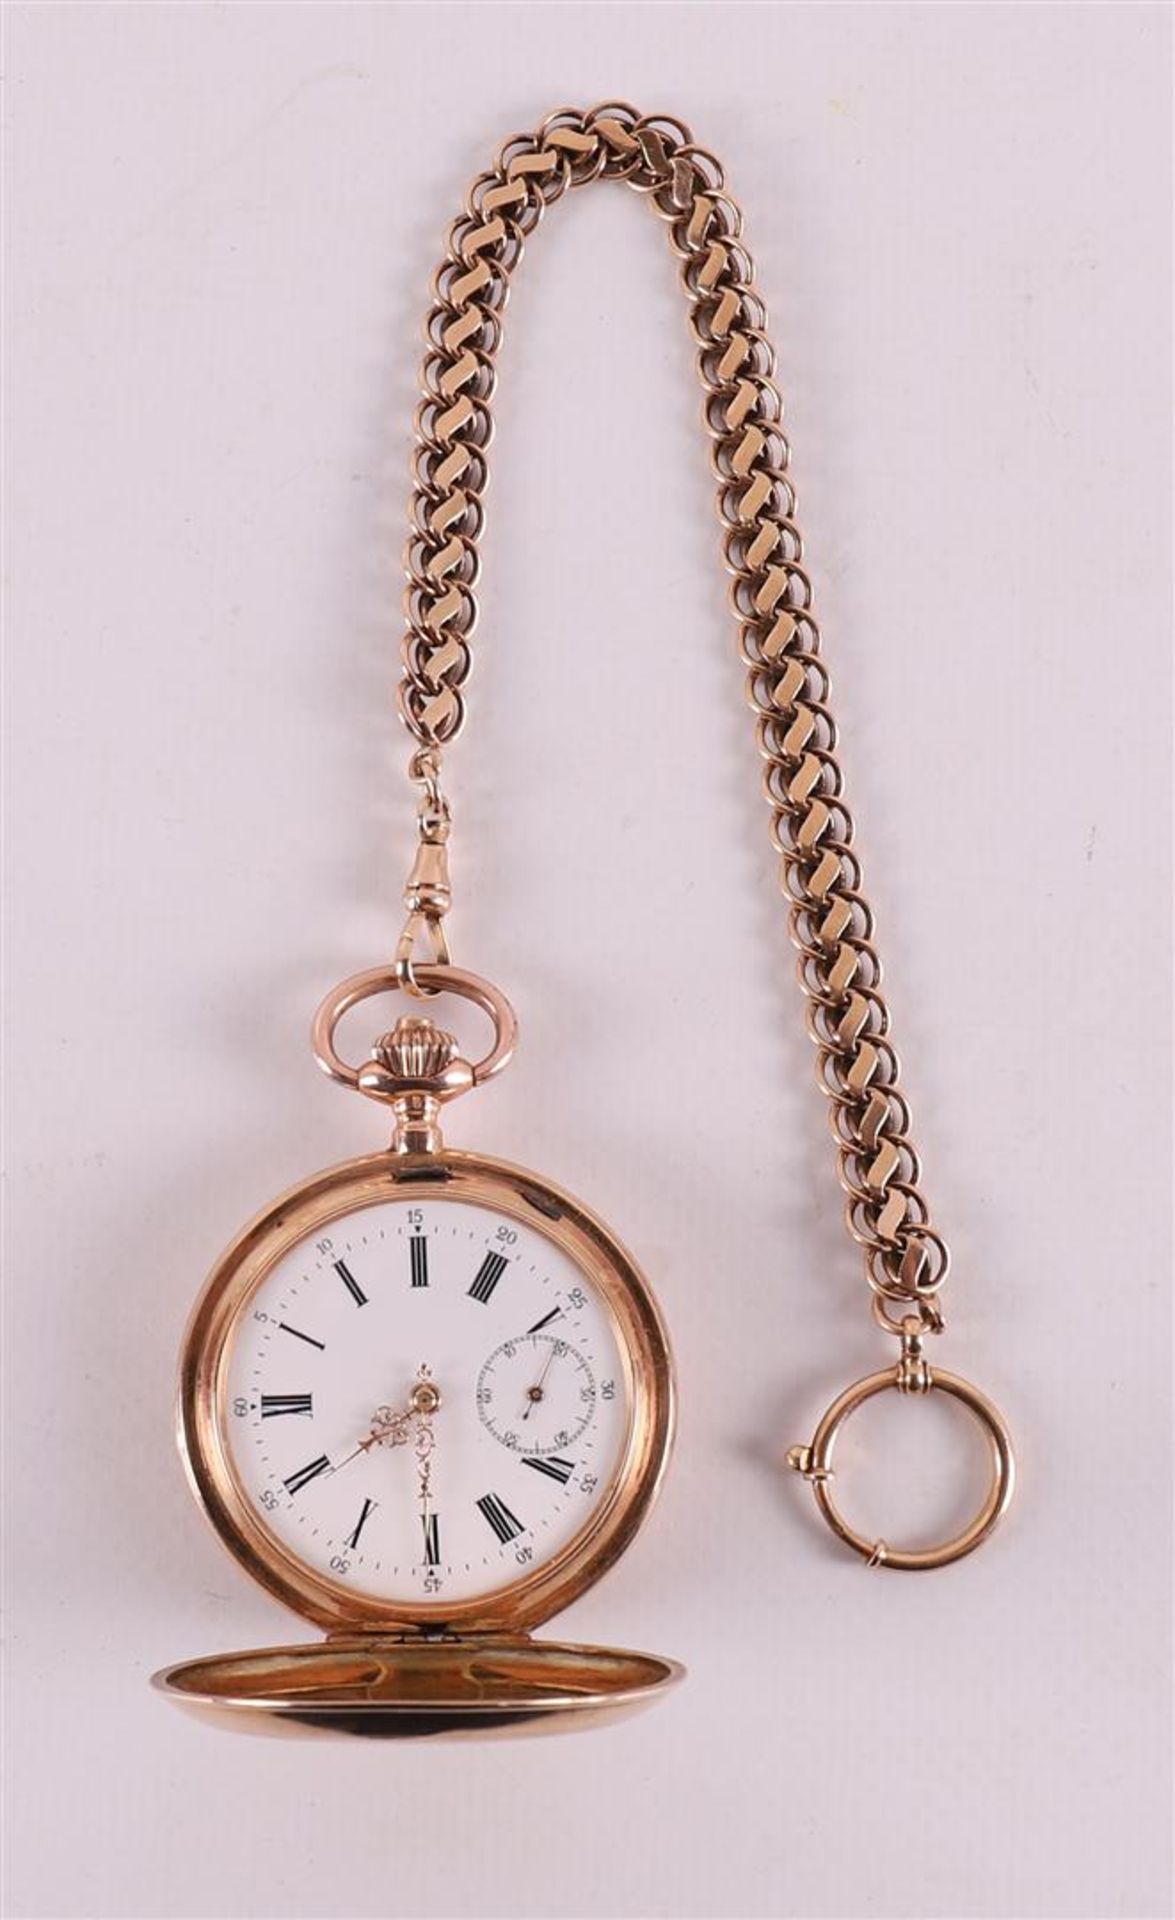 An Ancre Ligne droite men's vest pocket watch in a 14 kt case and ditto chain. - Image 2 of 5